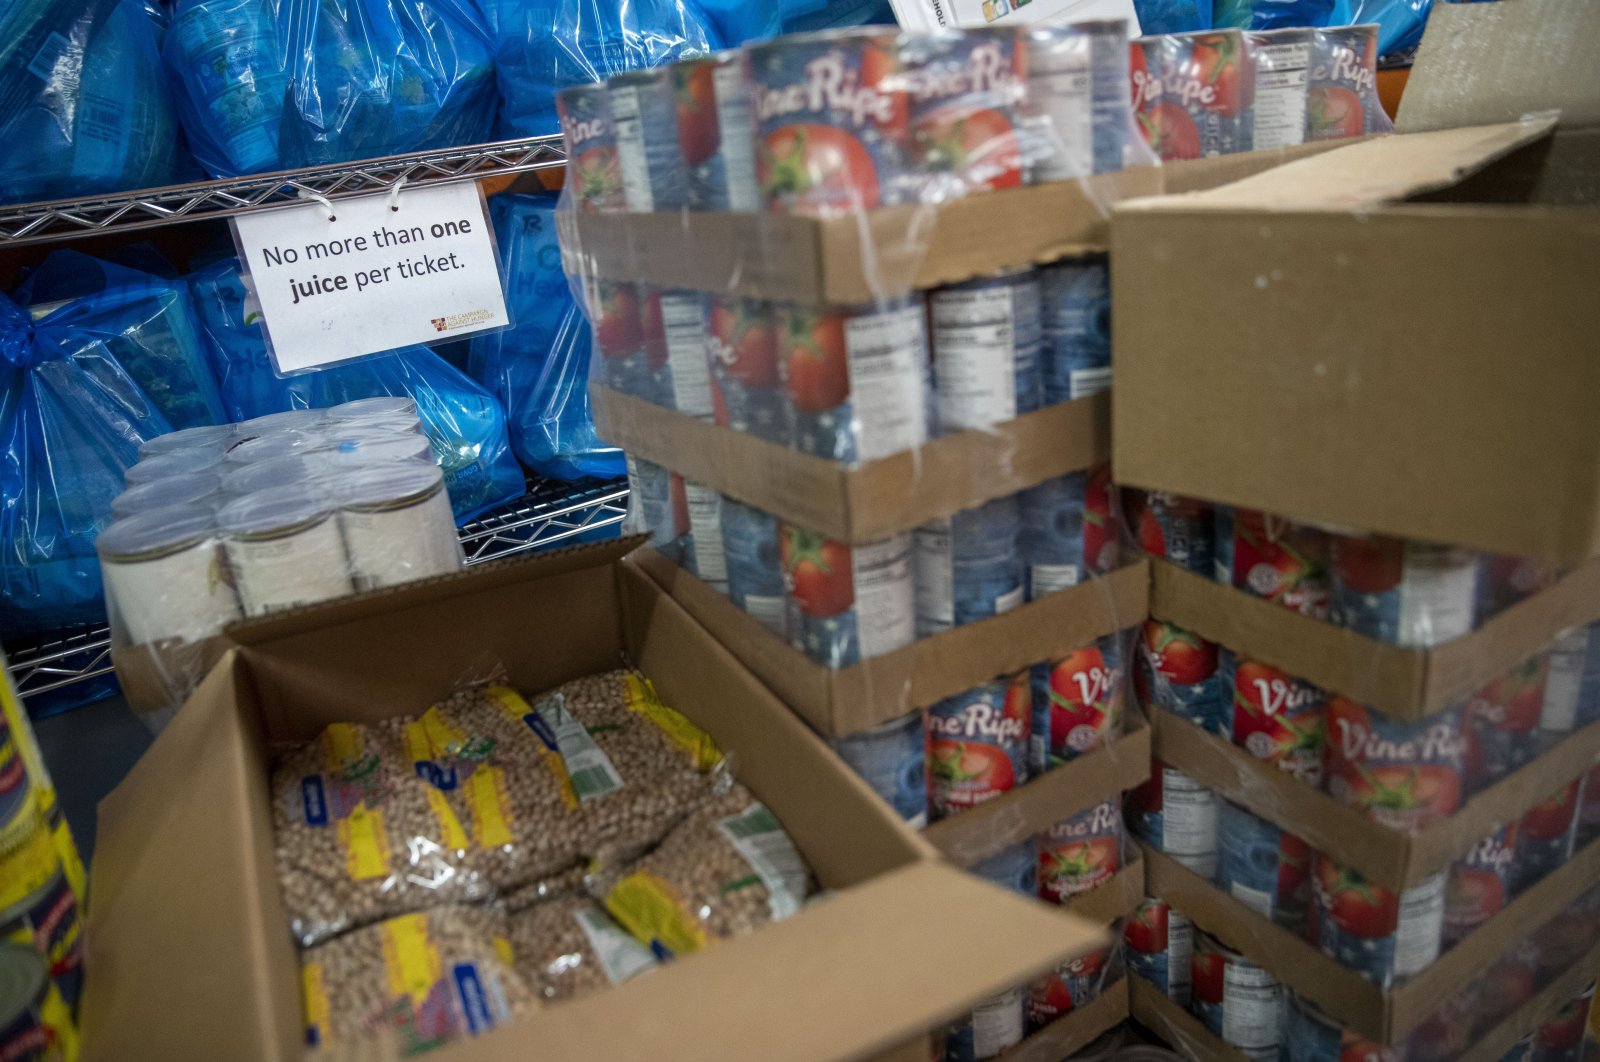 Groceries are stacked in a storage area at The Campaign Against Hunger food pantry, Thursday, April 16, 2020, in the Bedford-Stuyvesant neighborhood of the Brooklyn borough of New York. (AP Photo)